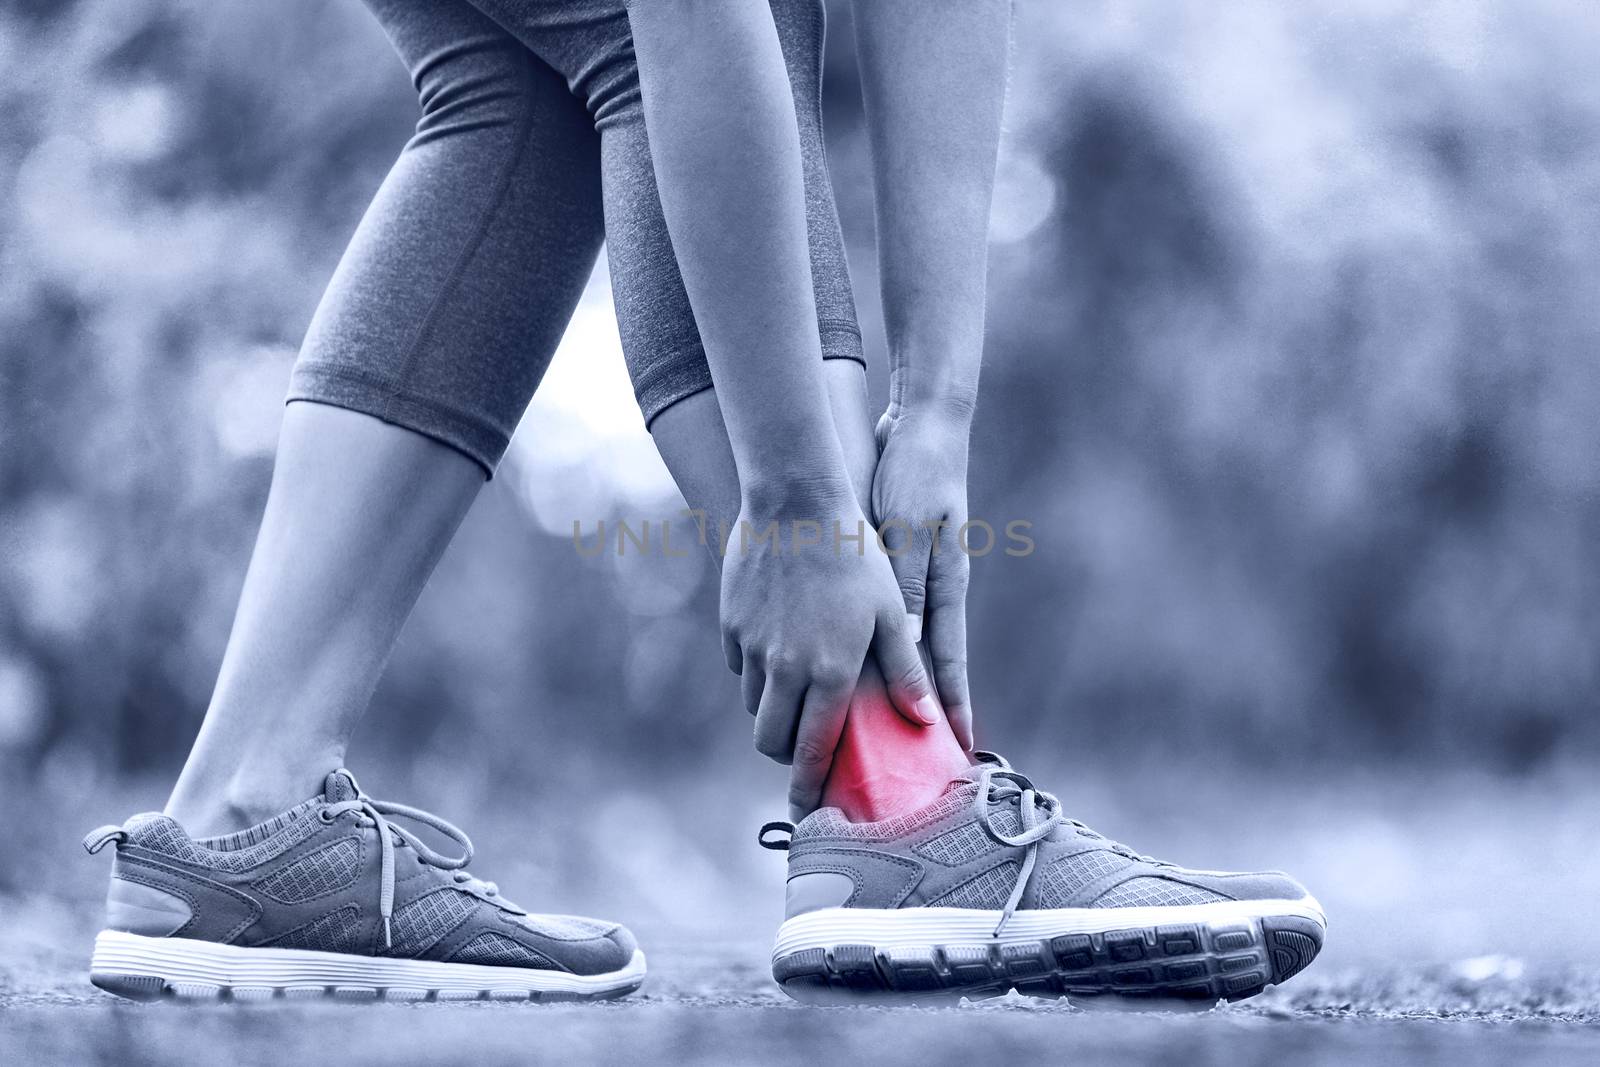 Broken twisted ankle - running sport injury. Female runner touching foot in pain due to sprained ankle.